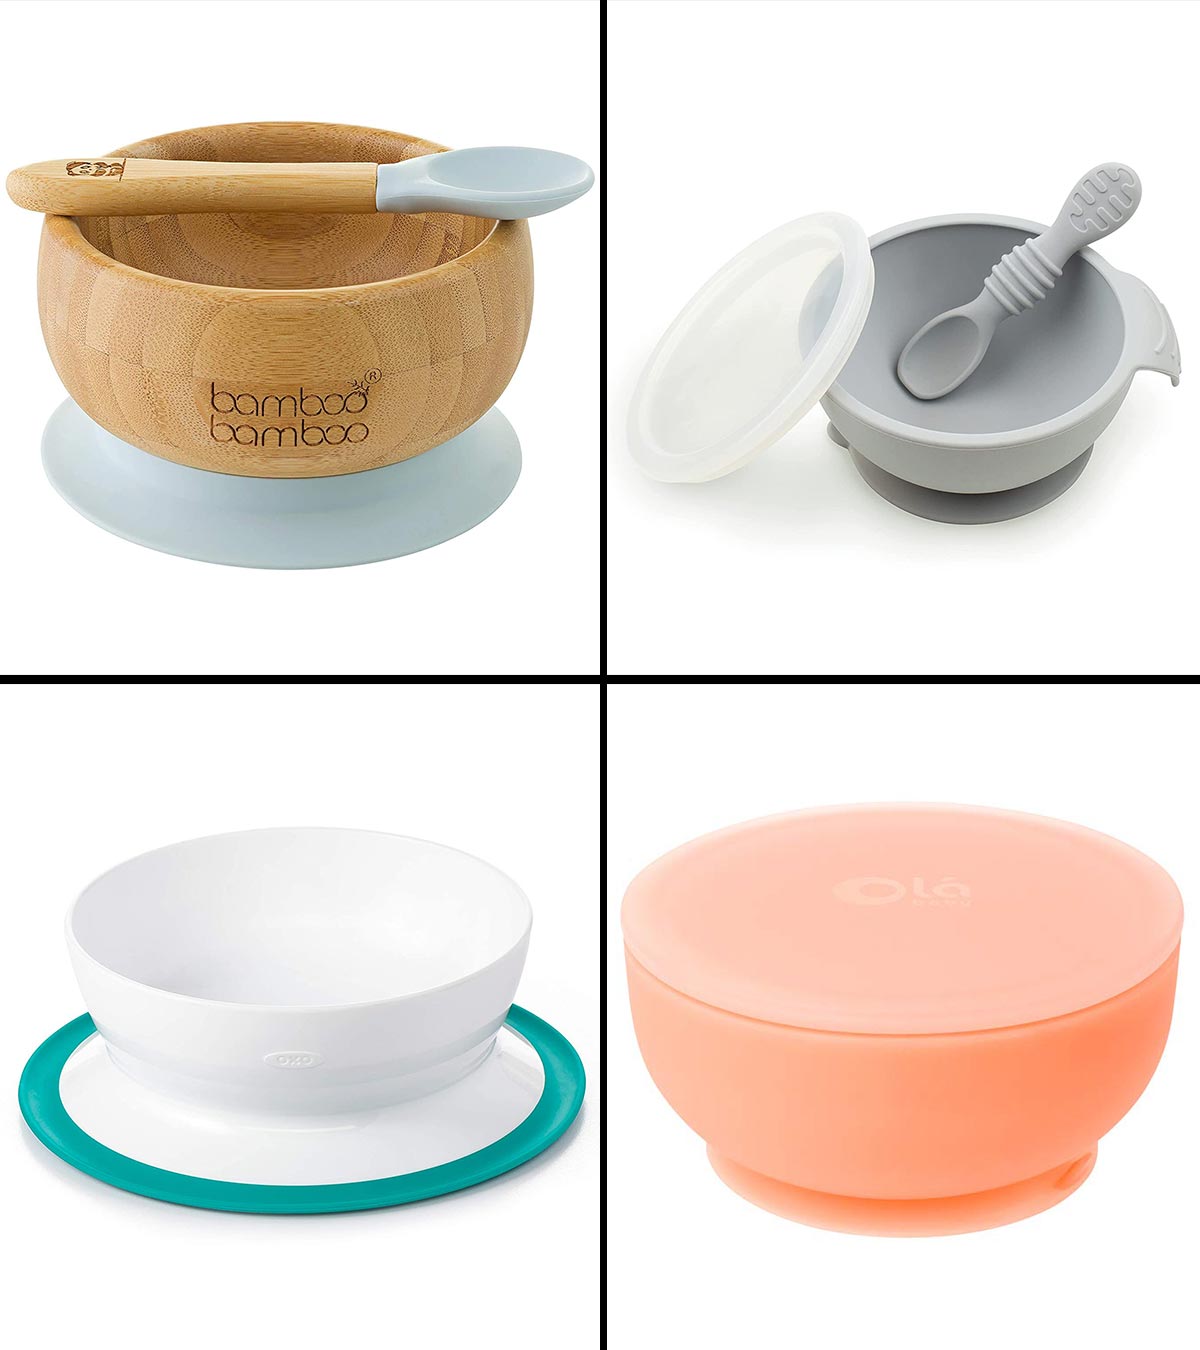 https://www.momjunction.com/wp-content/uploads/2021/09/15-Best-Suction-Bowls-For-Babies-And-Toddlers-In-2021-Banner-MJ.jpg